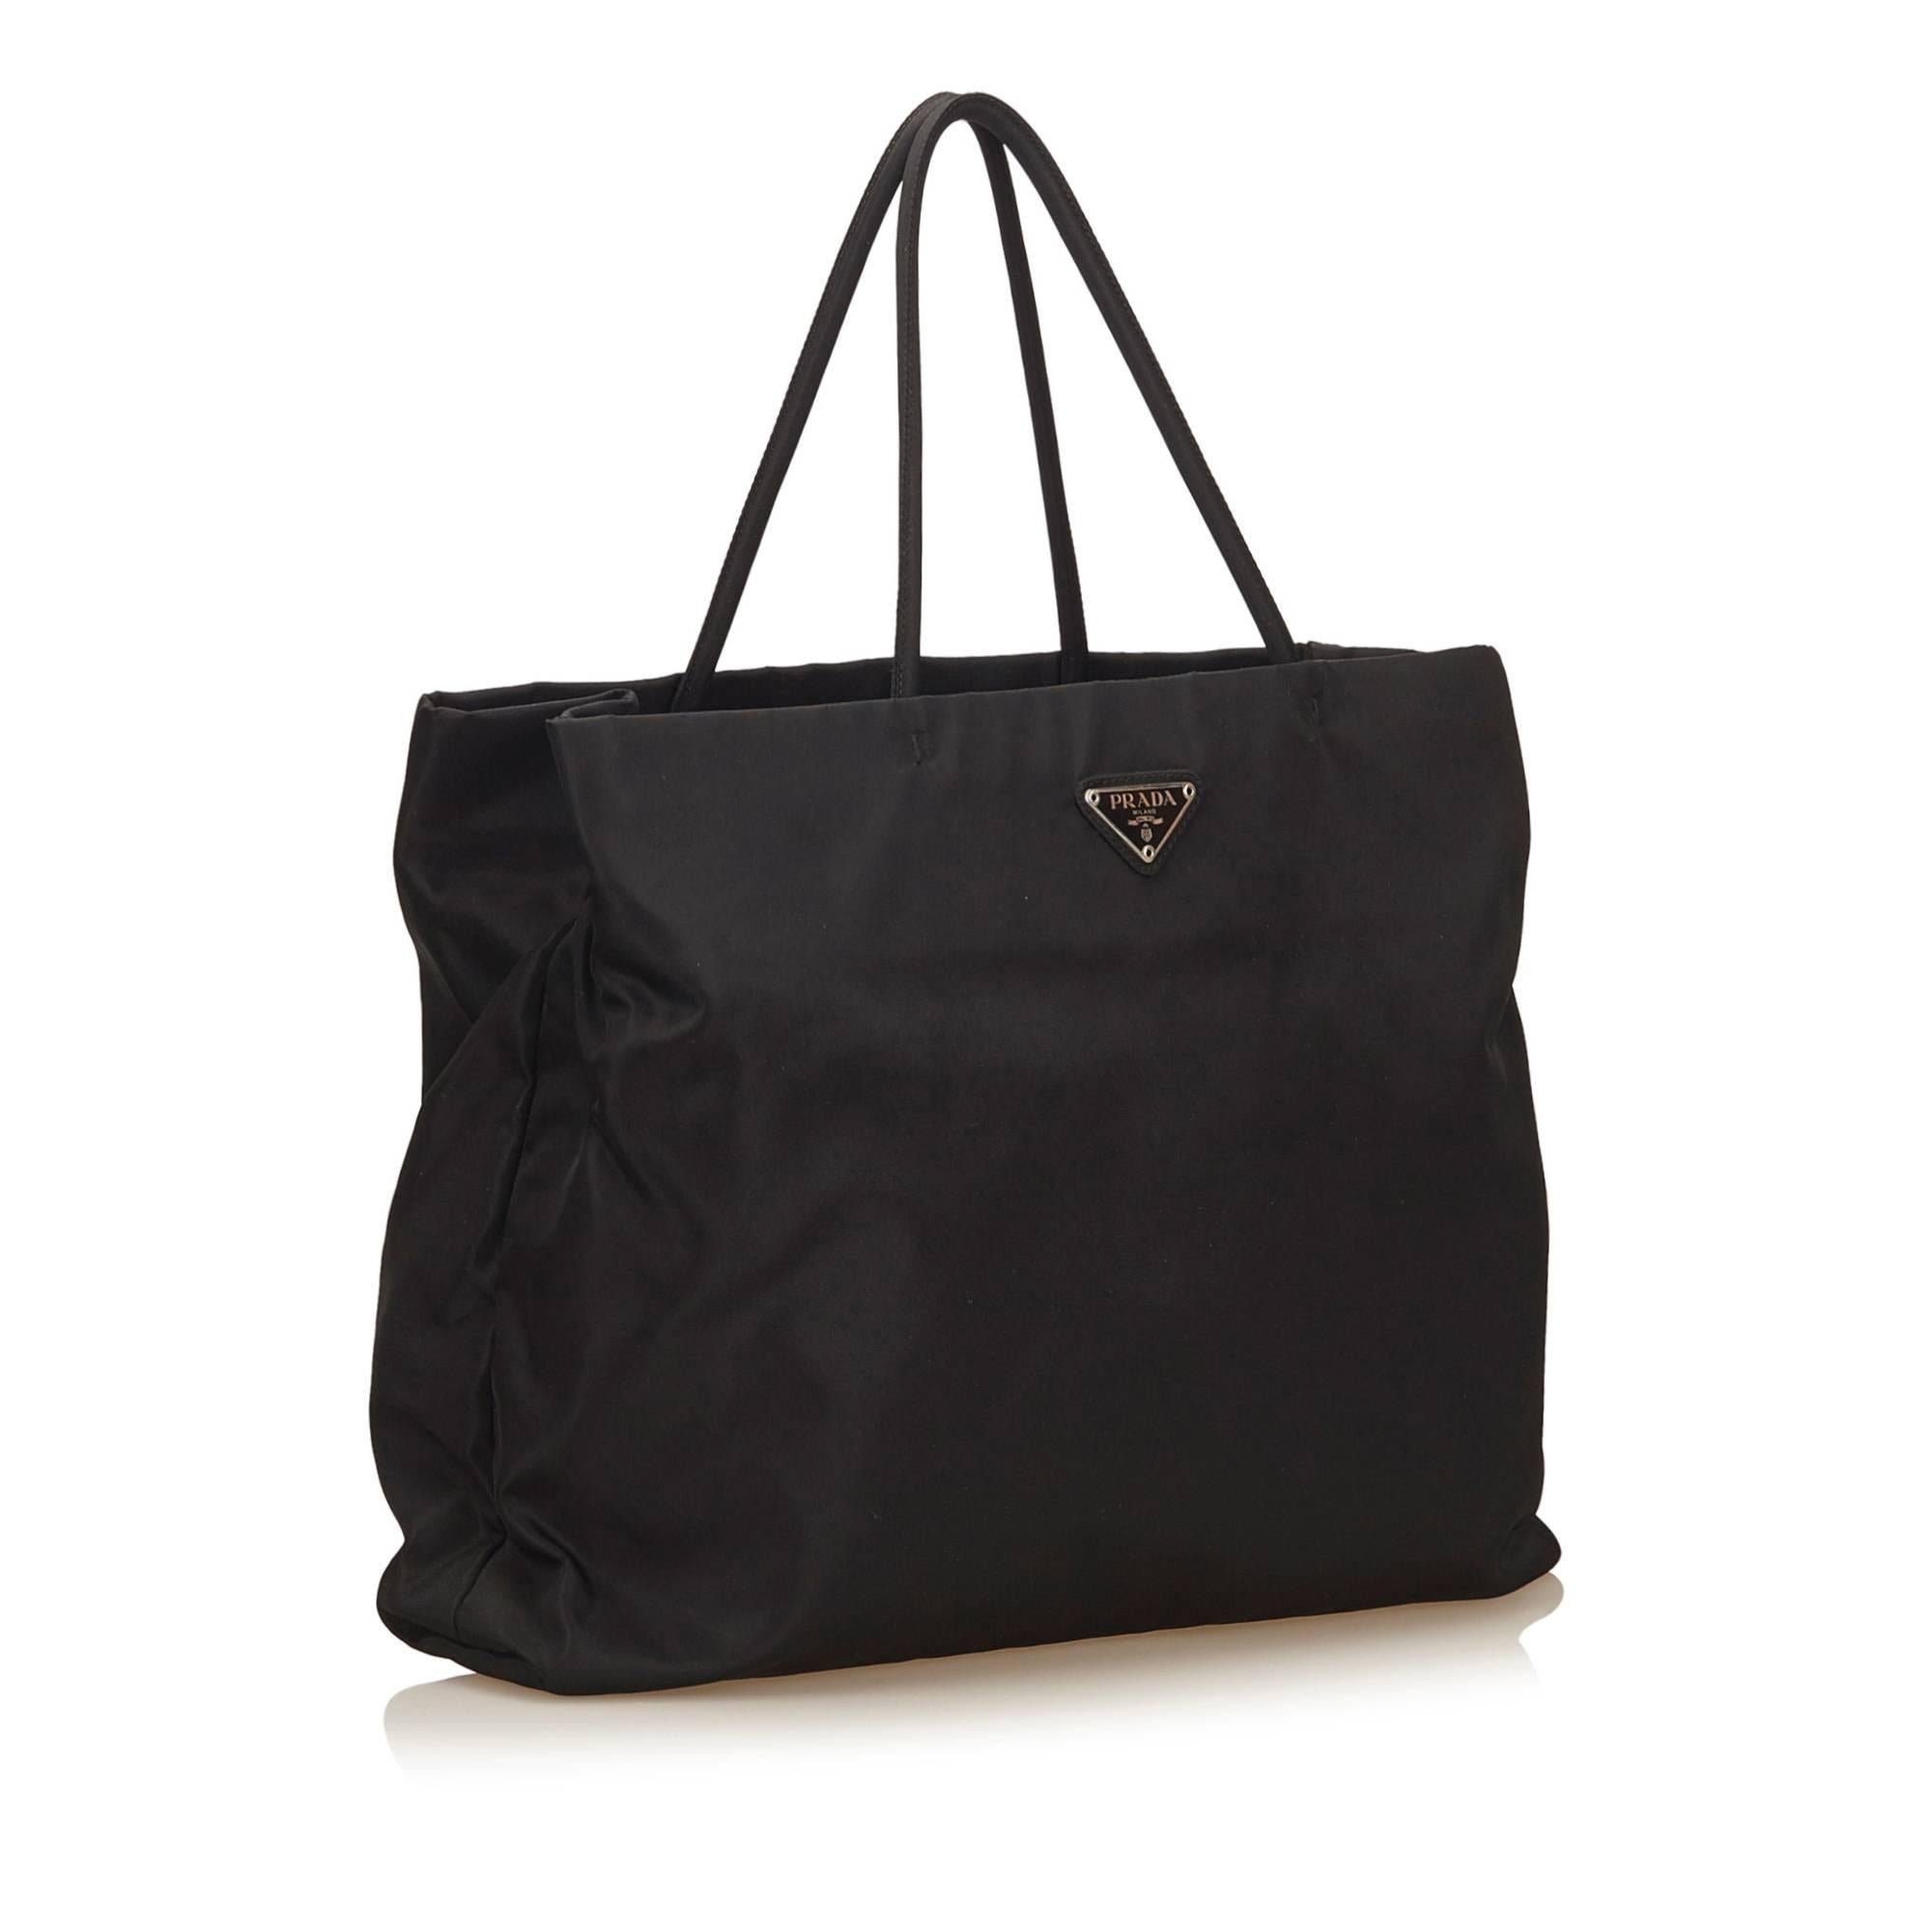 This tote bag features a nylon body, rolled straps, open top, interior compartment, and interior zip pocket.  The bottom is moderately stained sue to transfer of color.